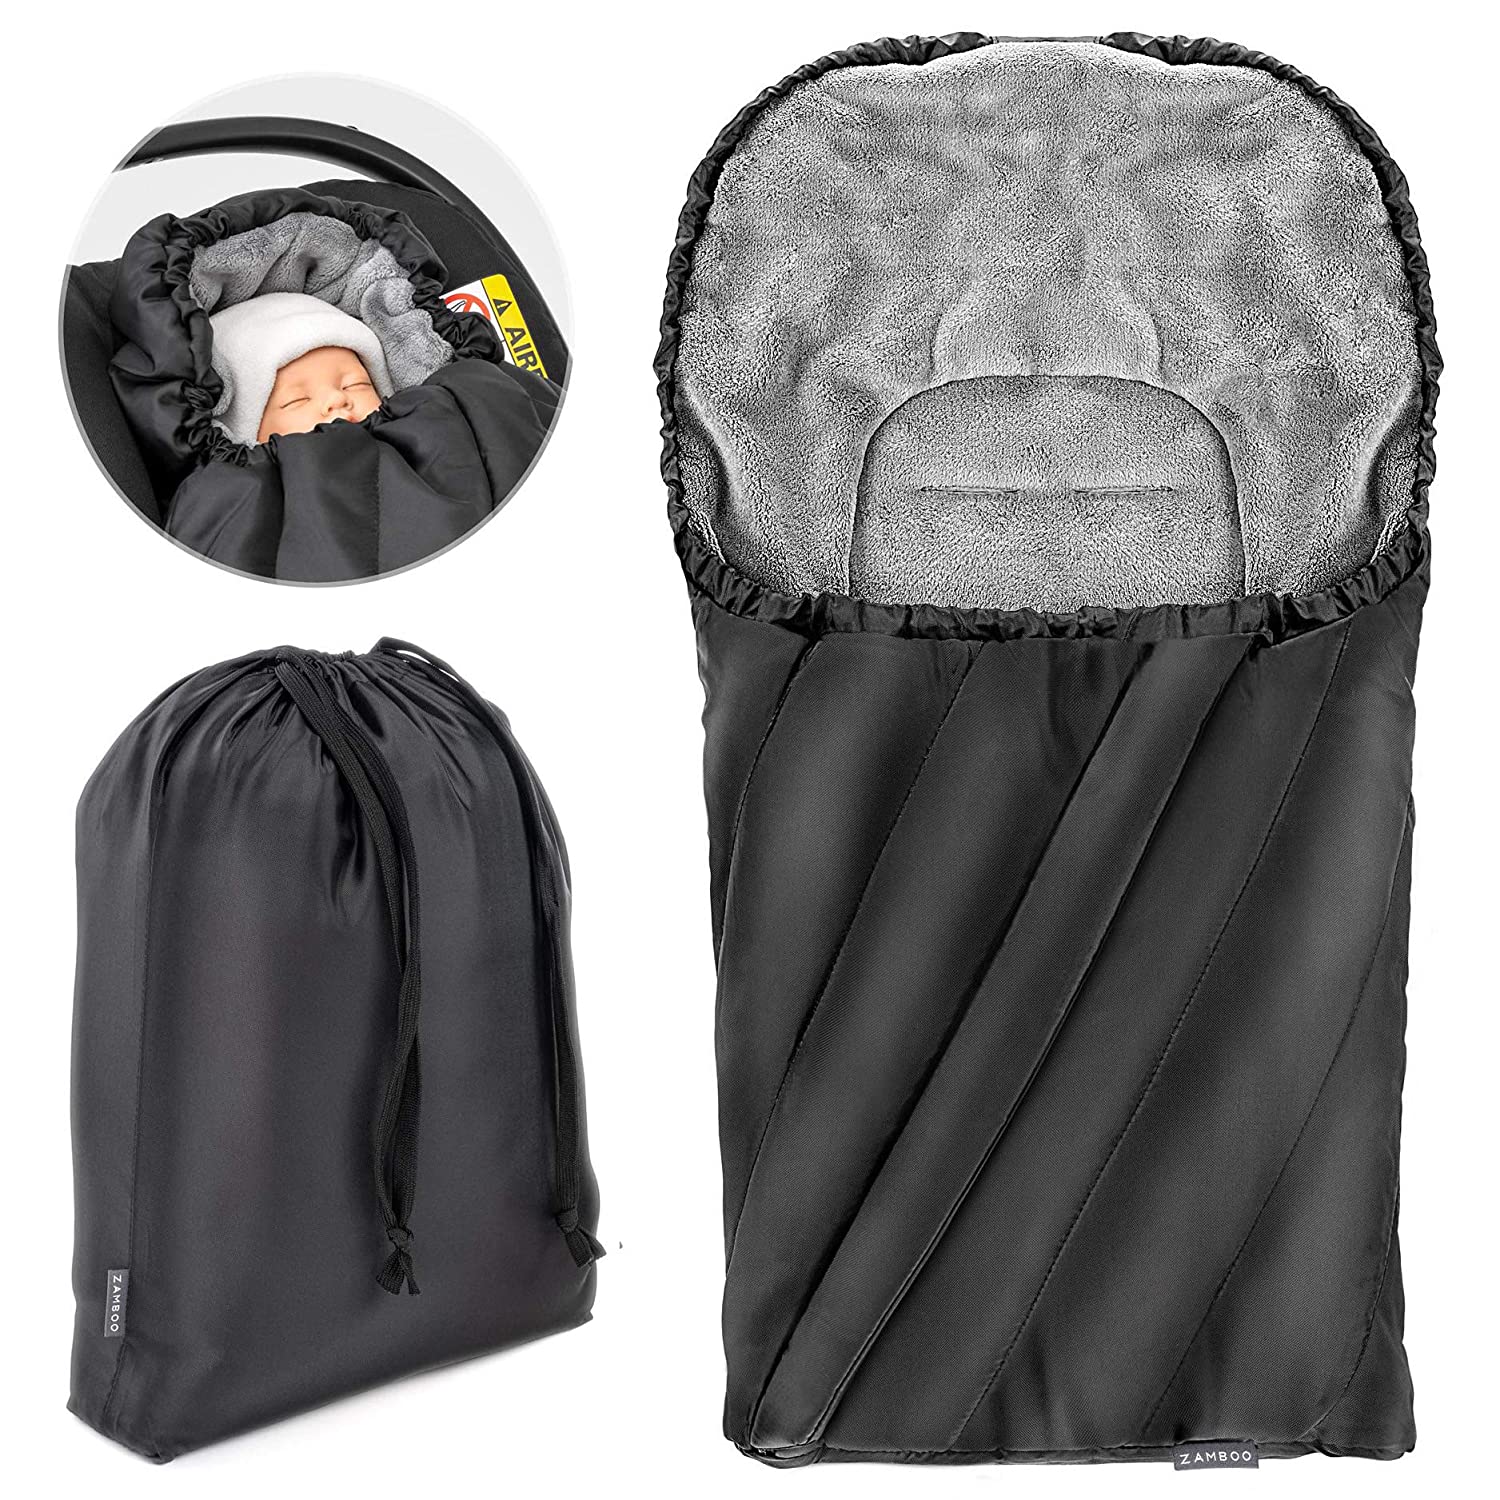 Zamboo Footmuff for Baby Car Seat – Baby Winter Footmuff Made of Warm Thermal Fleece with Hood and Pocket – Black